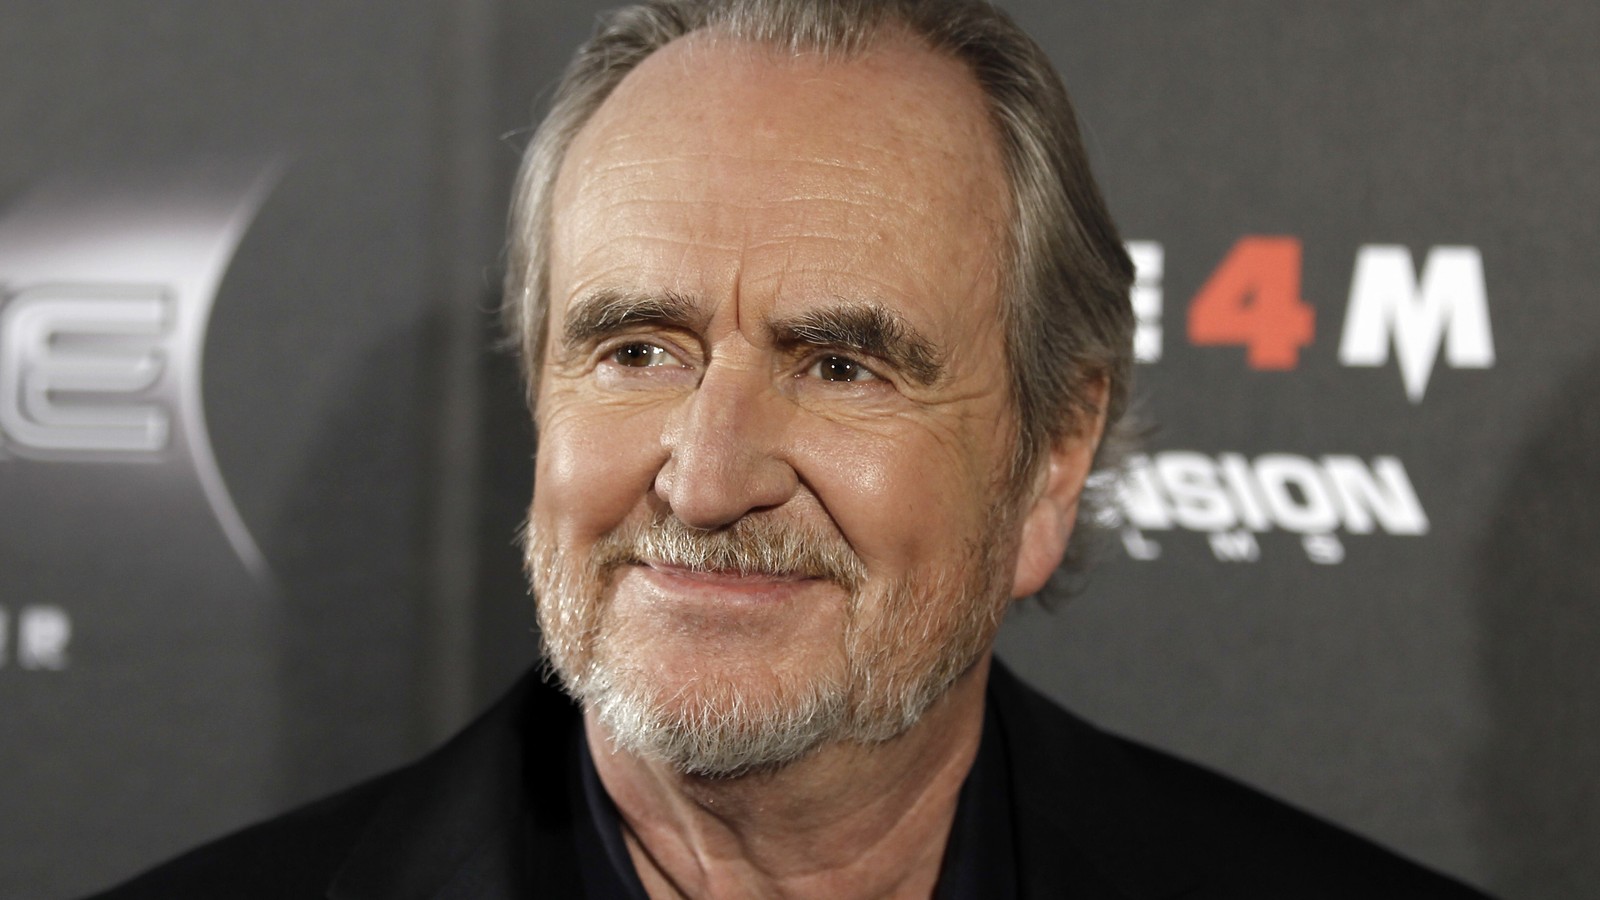 From 'A Nightmare on Elm Street' to 'Scream': How Wes Craven